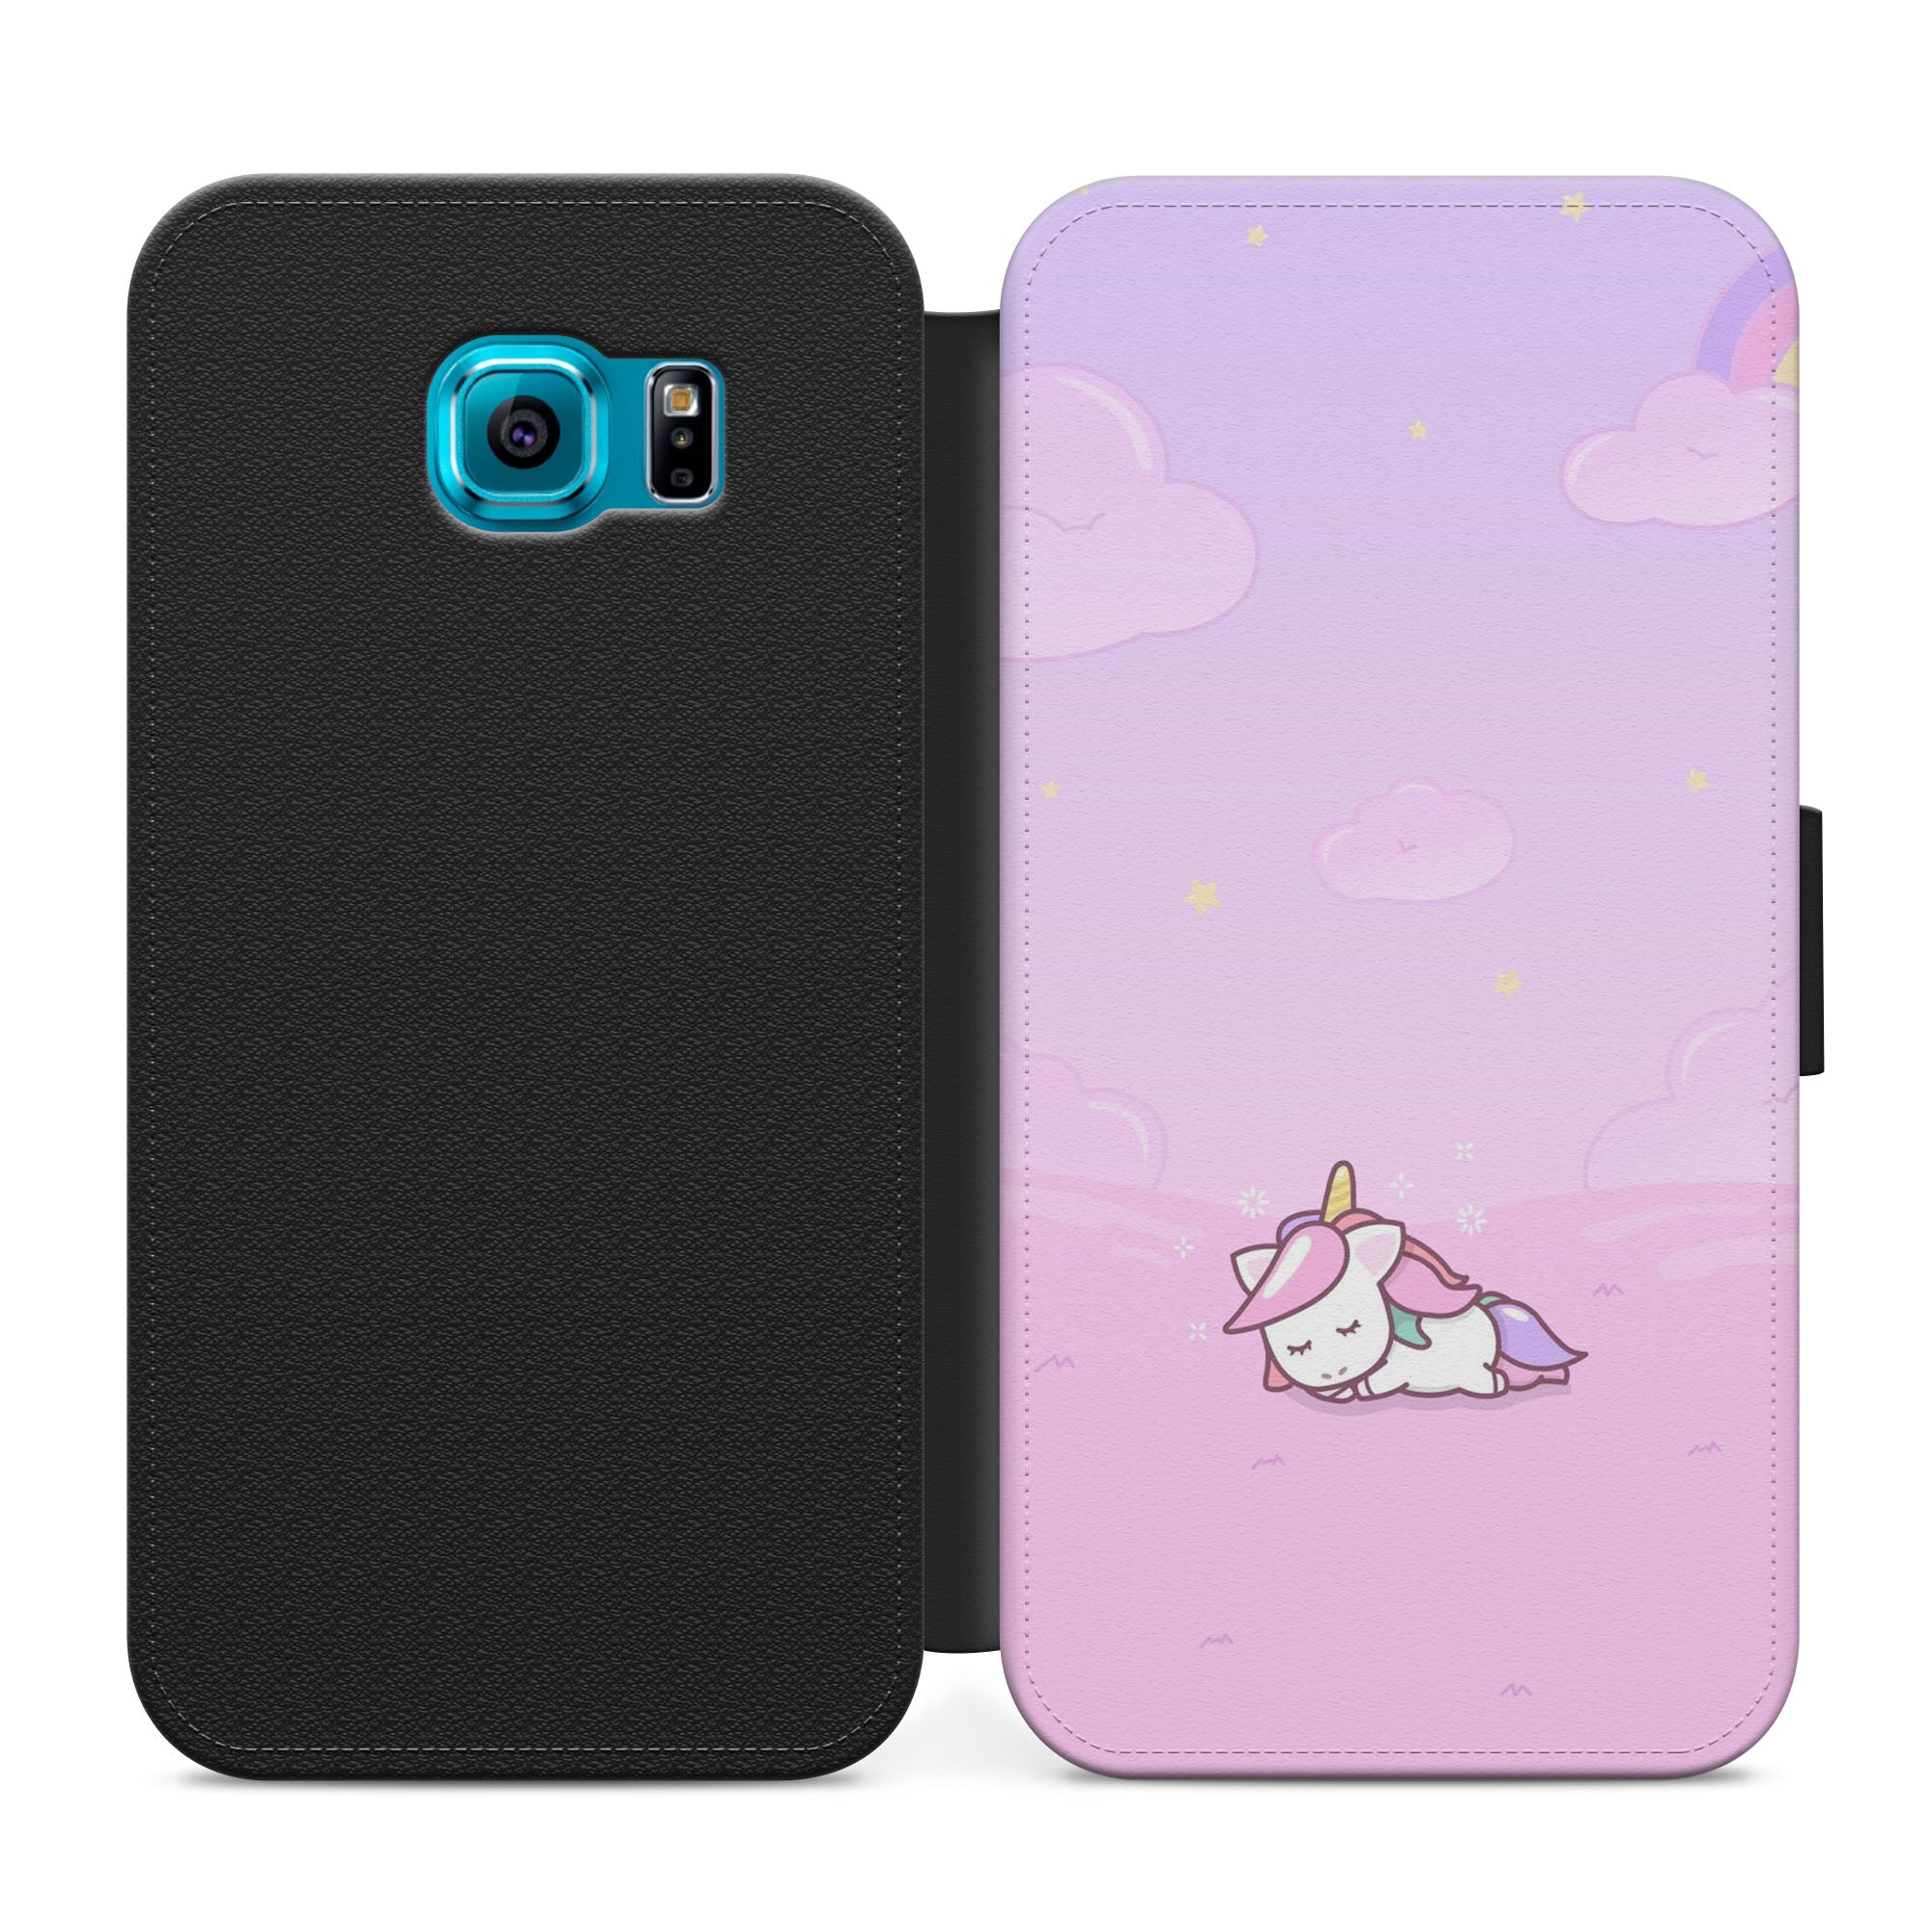 Cute Snoozing Unicorn Faux Leather Flip Case Wallet for iPhone / Samsung